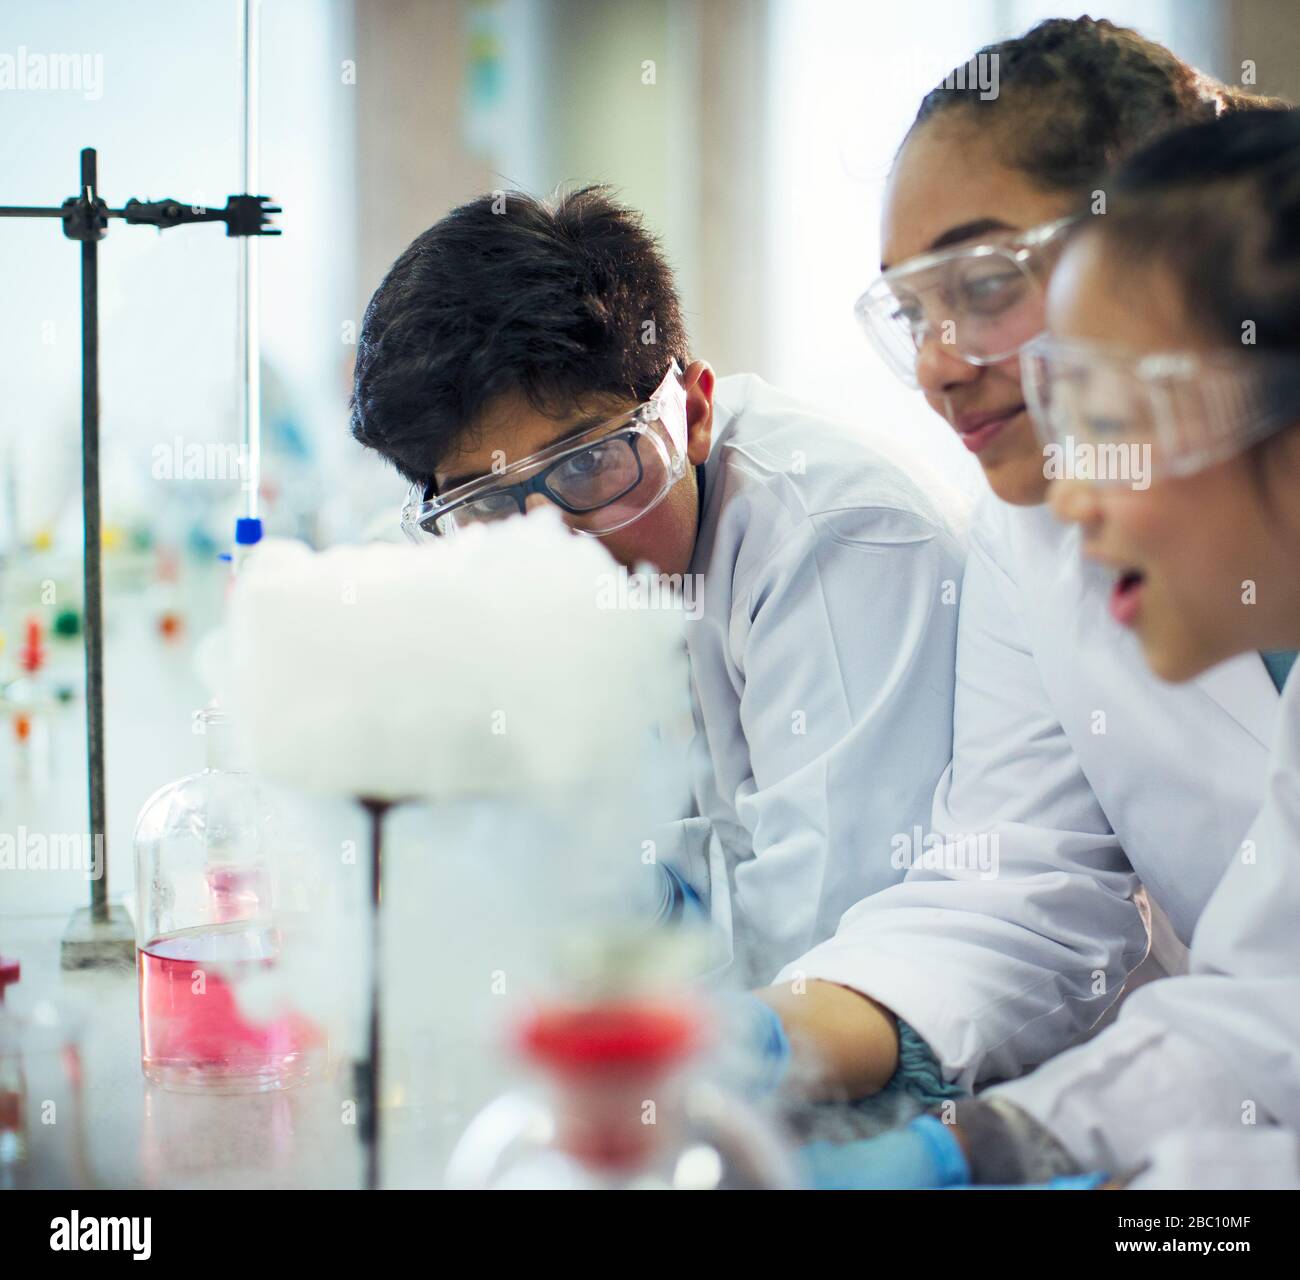 Students watching chemical reaction, conducting scientific experiment in laboratory classroom Stock Photo